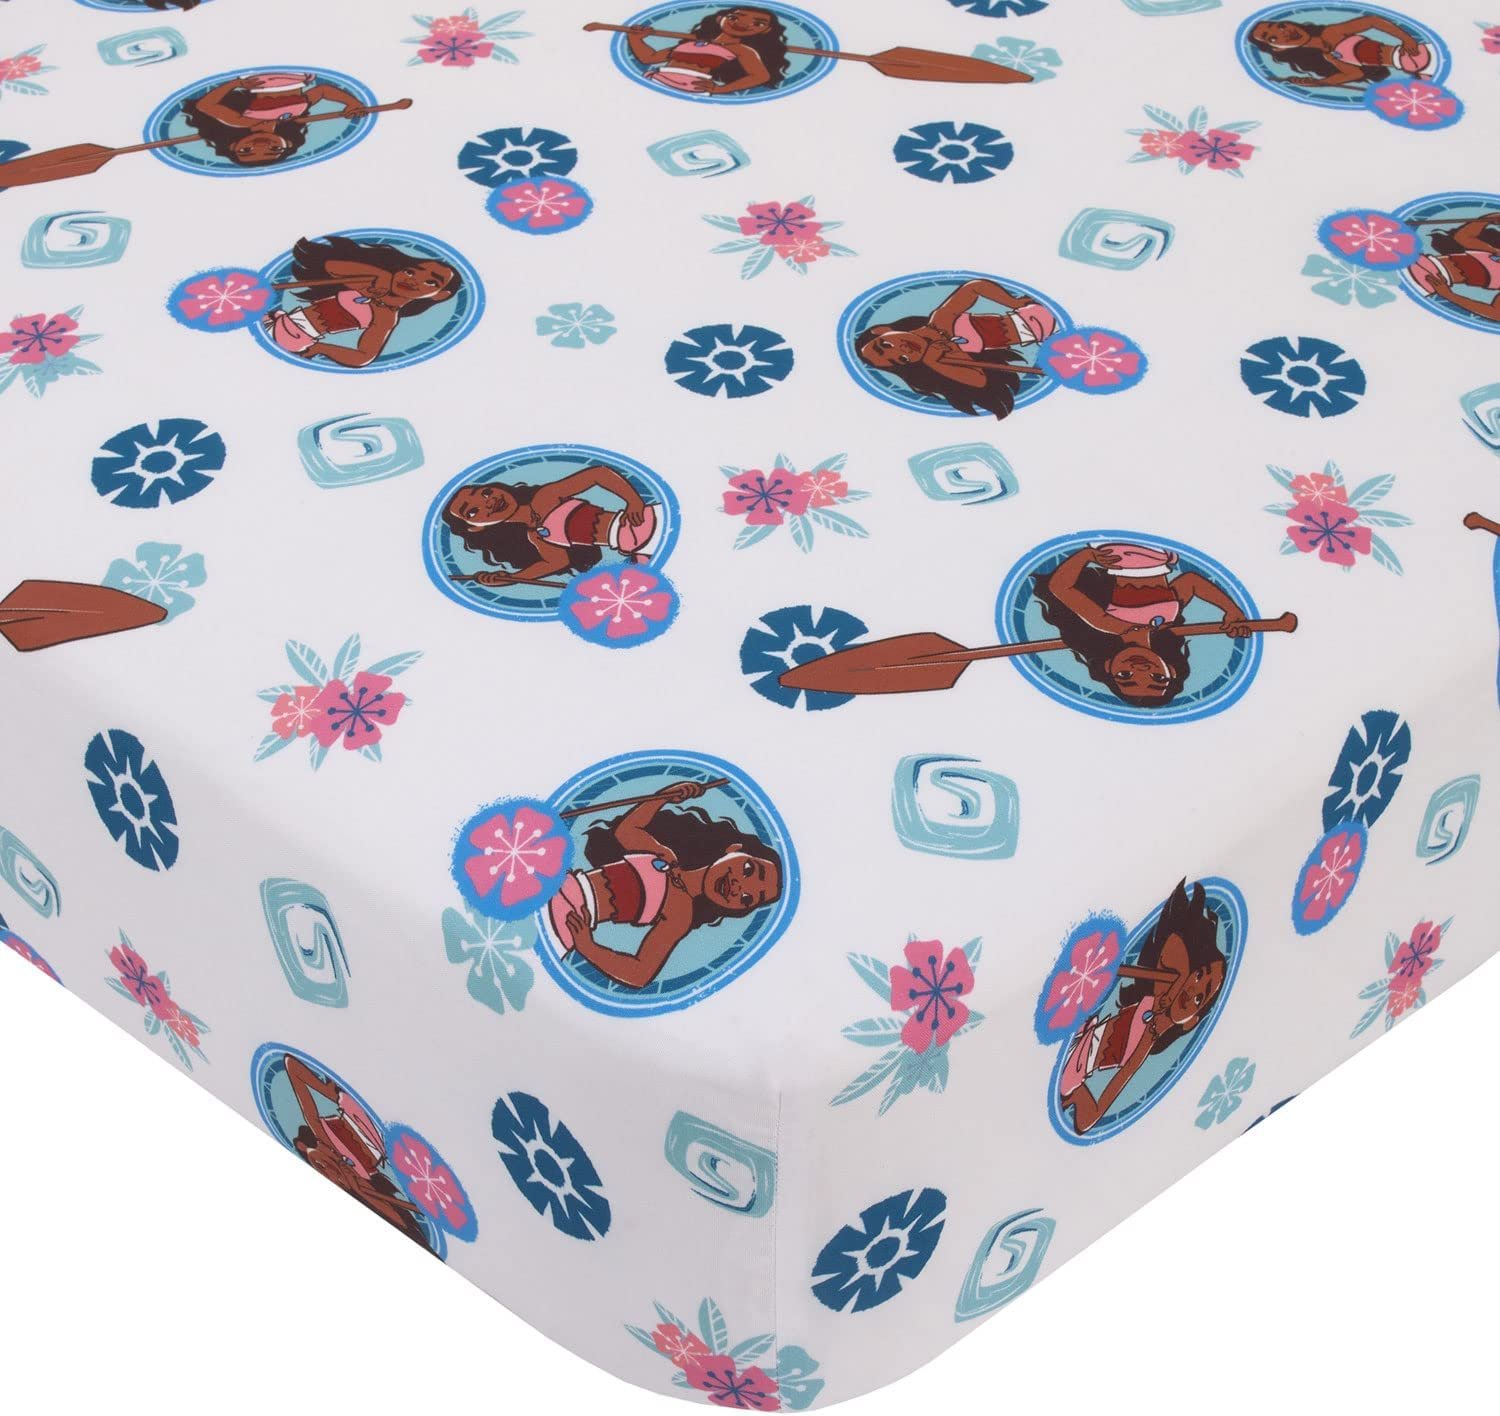 Disney Moana Fitted Crib Sheet 100% Soft Microfiber, Baby Sheet, Fits Standard Size Crib Mattress 28in x 52in - image 1 of 4